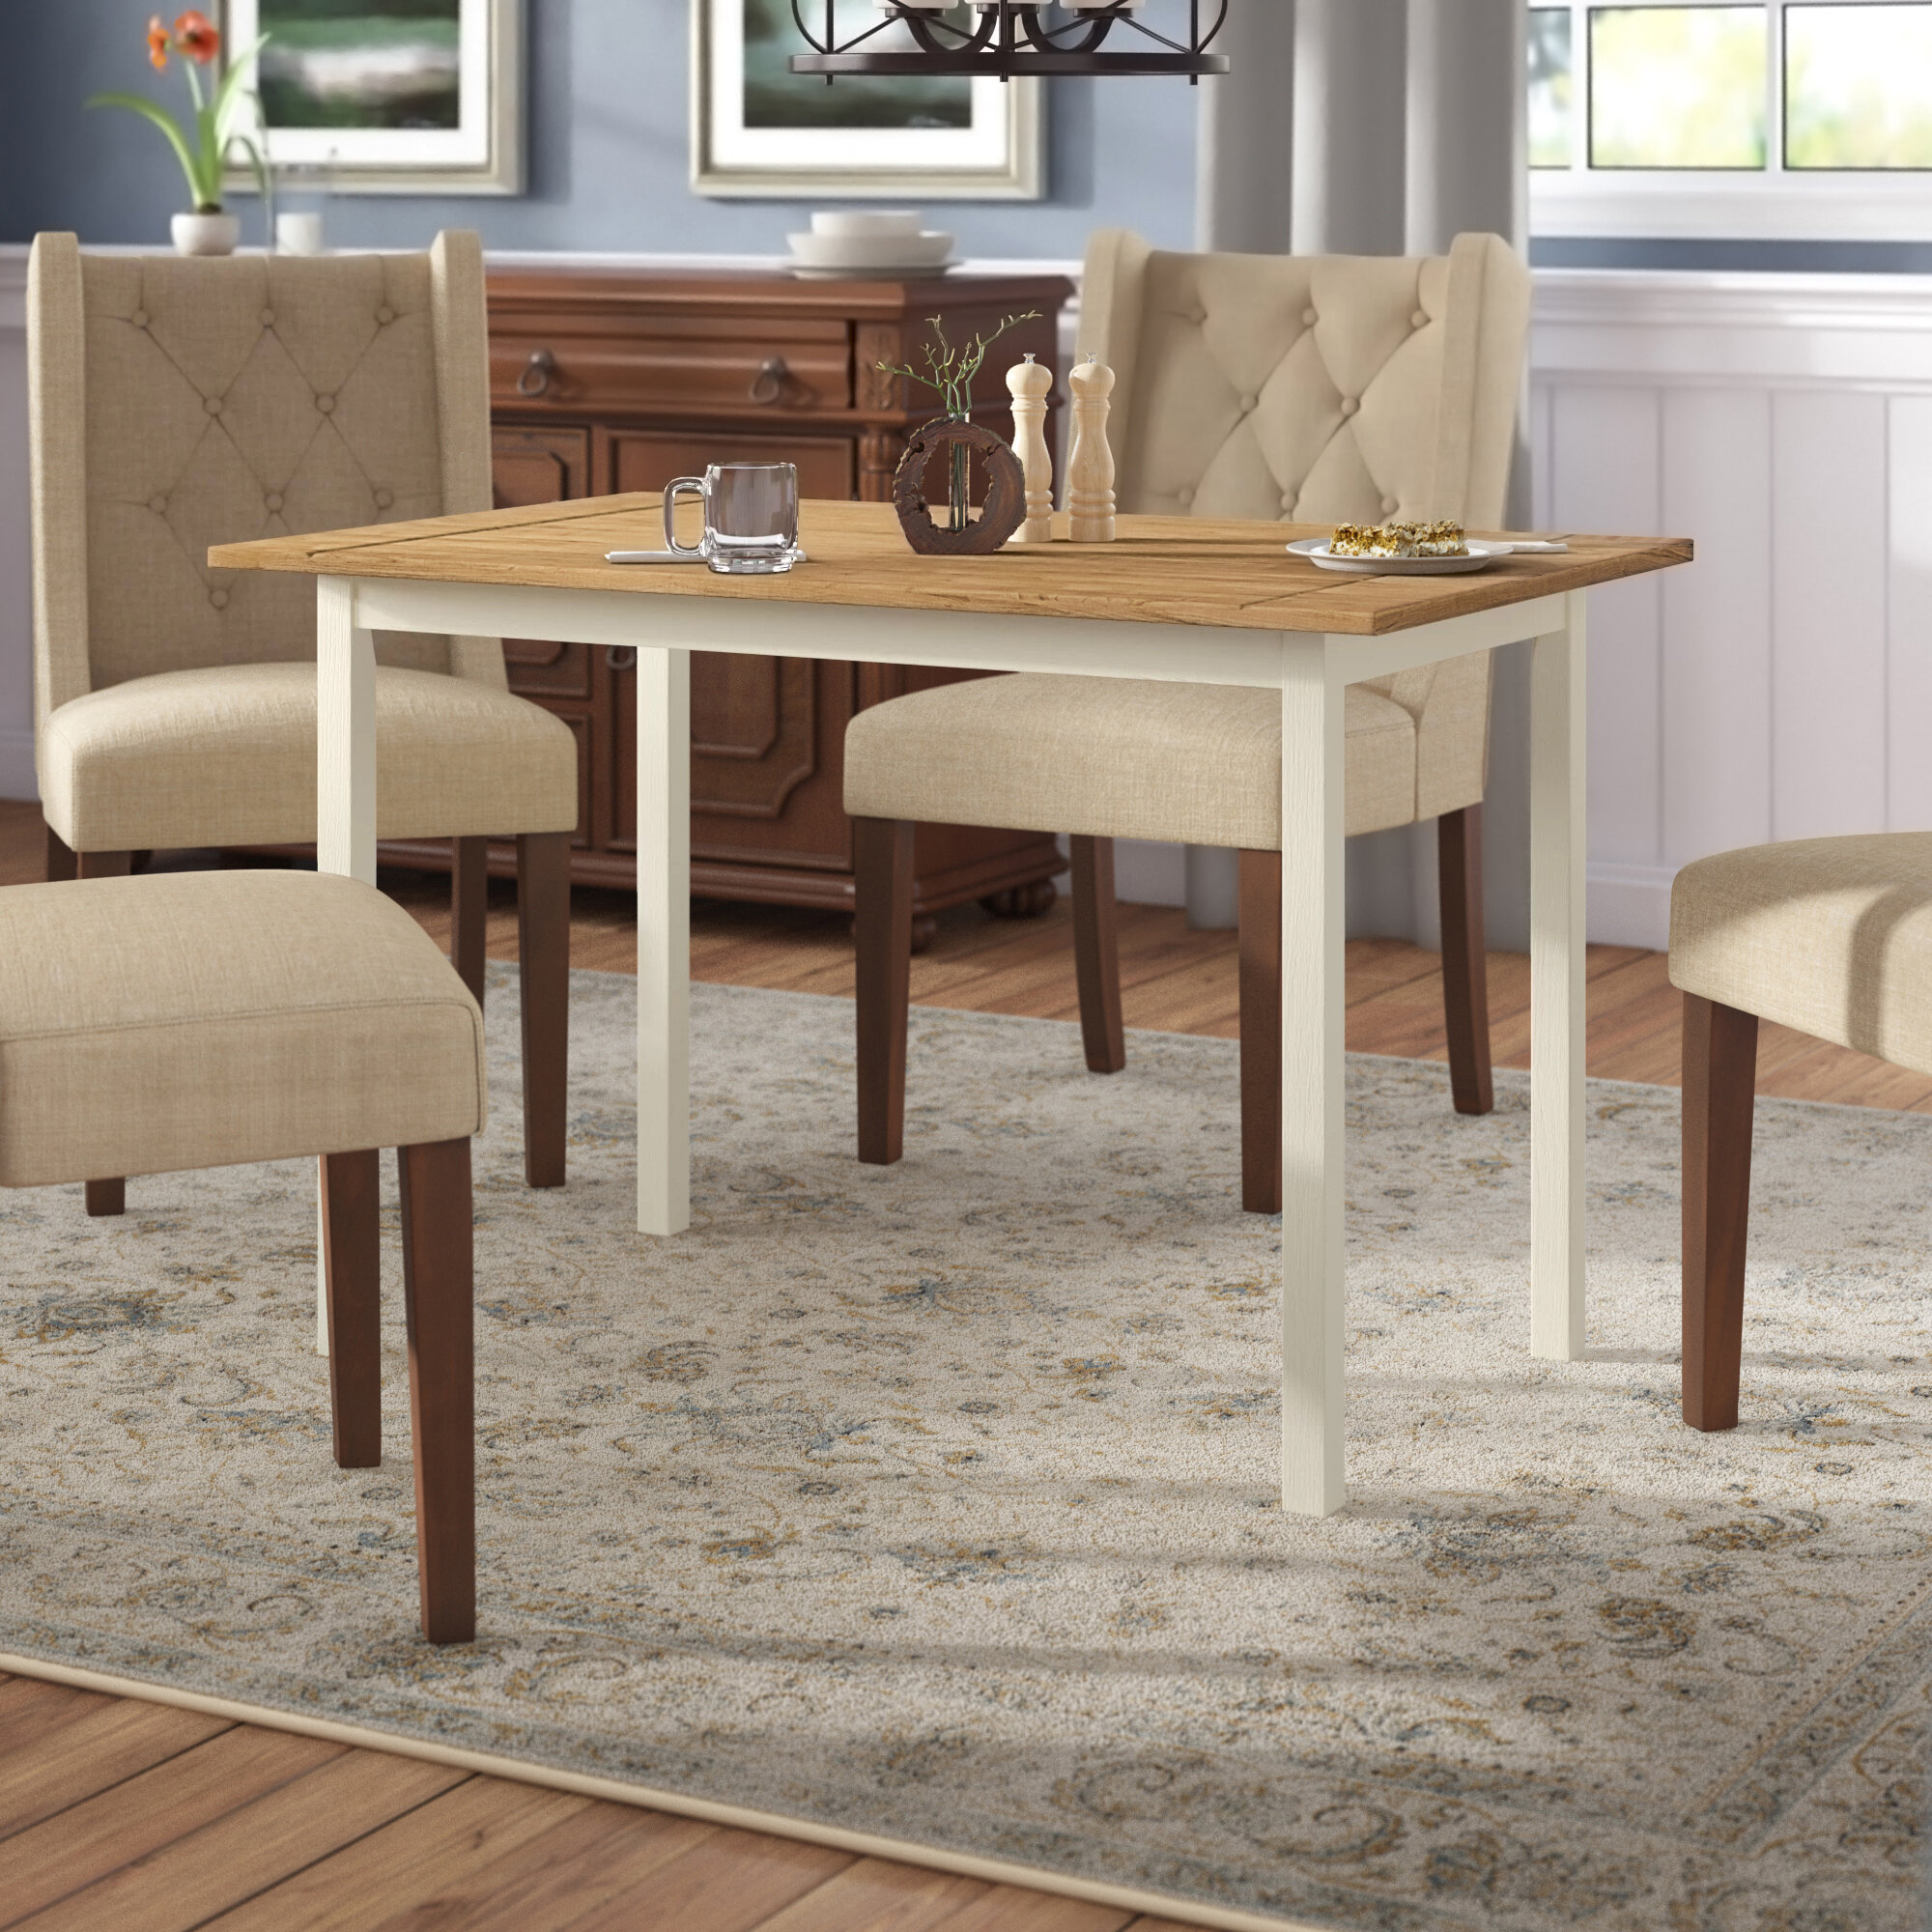 Wayfair Kitchen Dining Tables You Ll Love In 2021